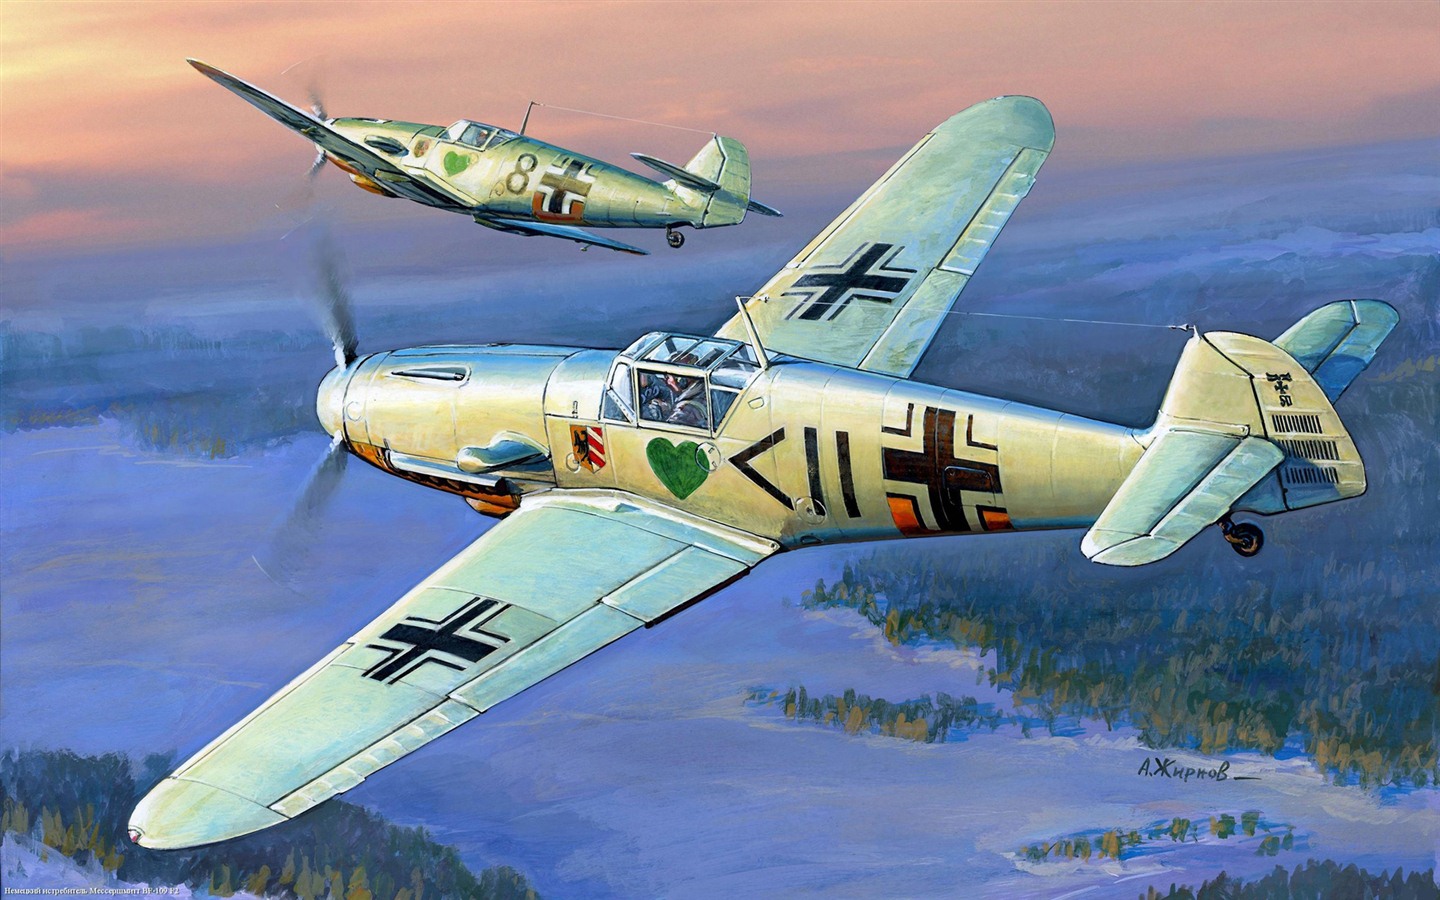 Military aircraft flight exquisite painting wallpapers #12 - 1440x900